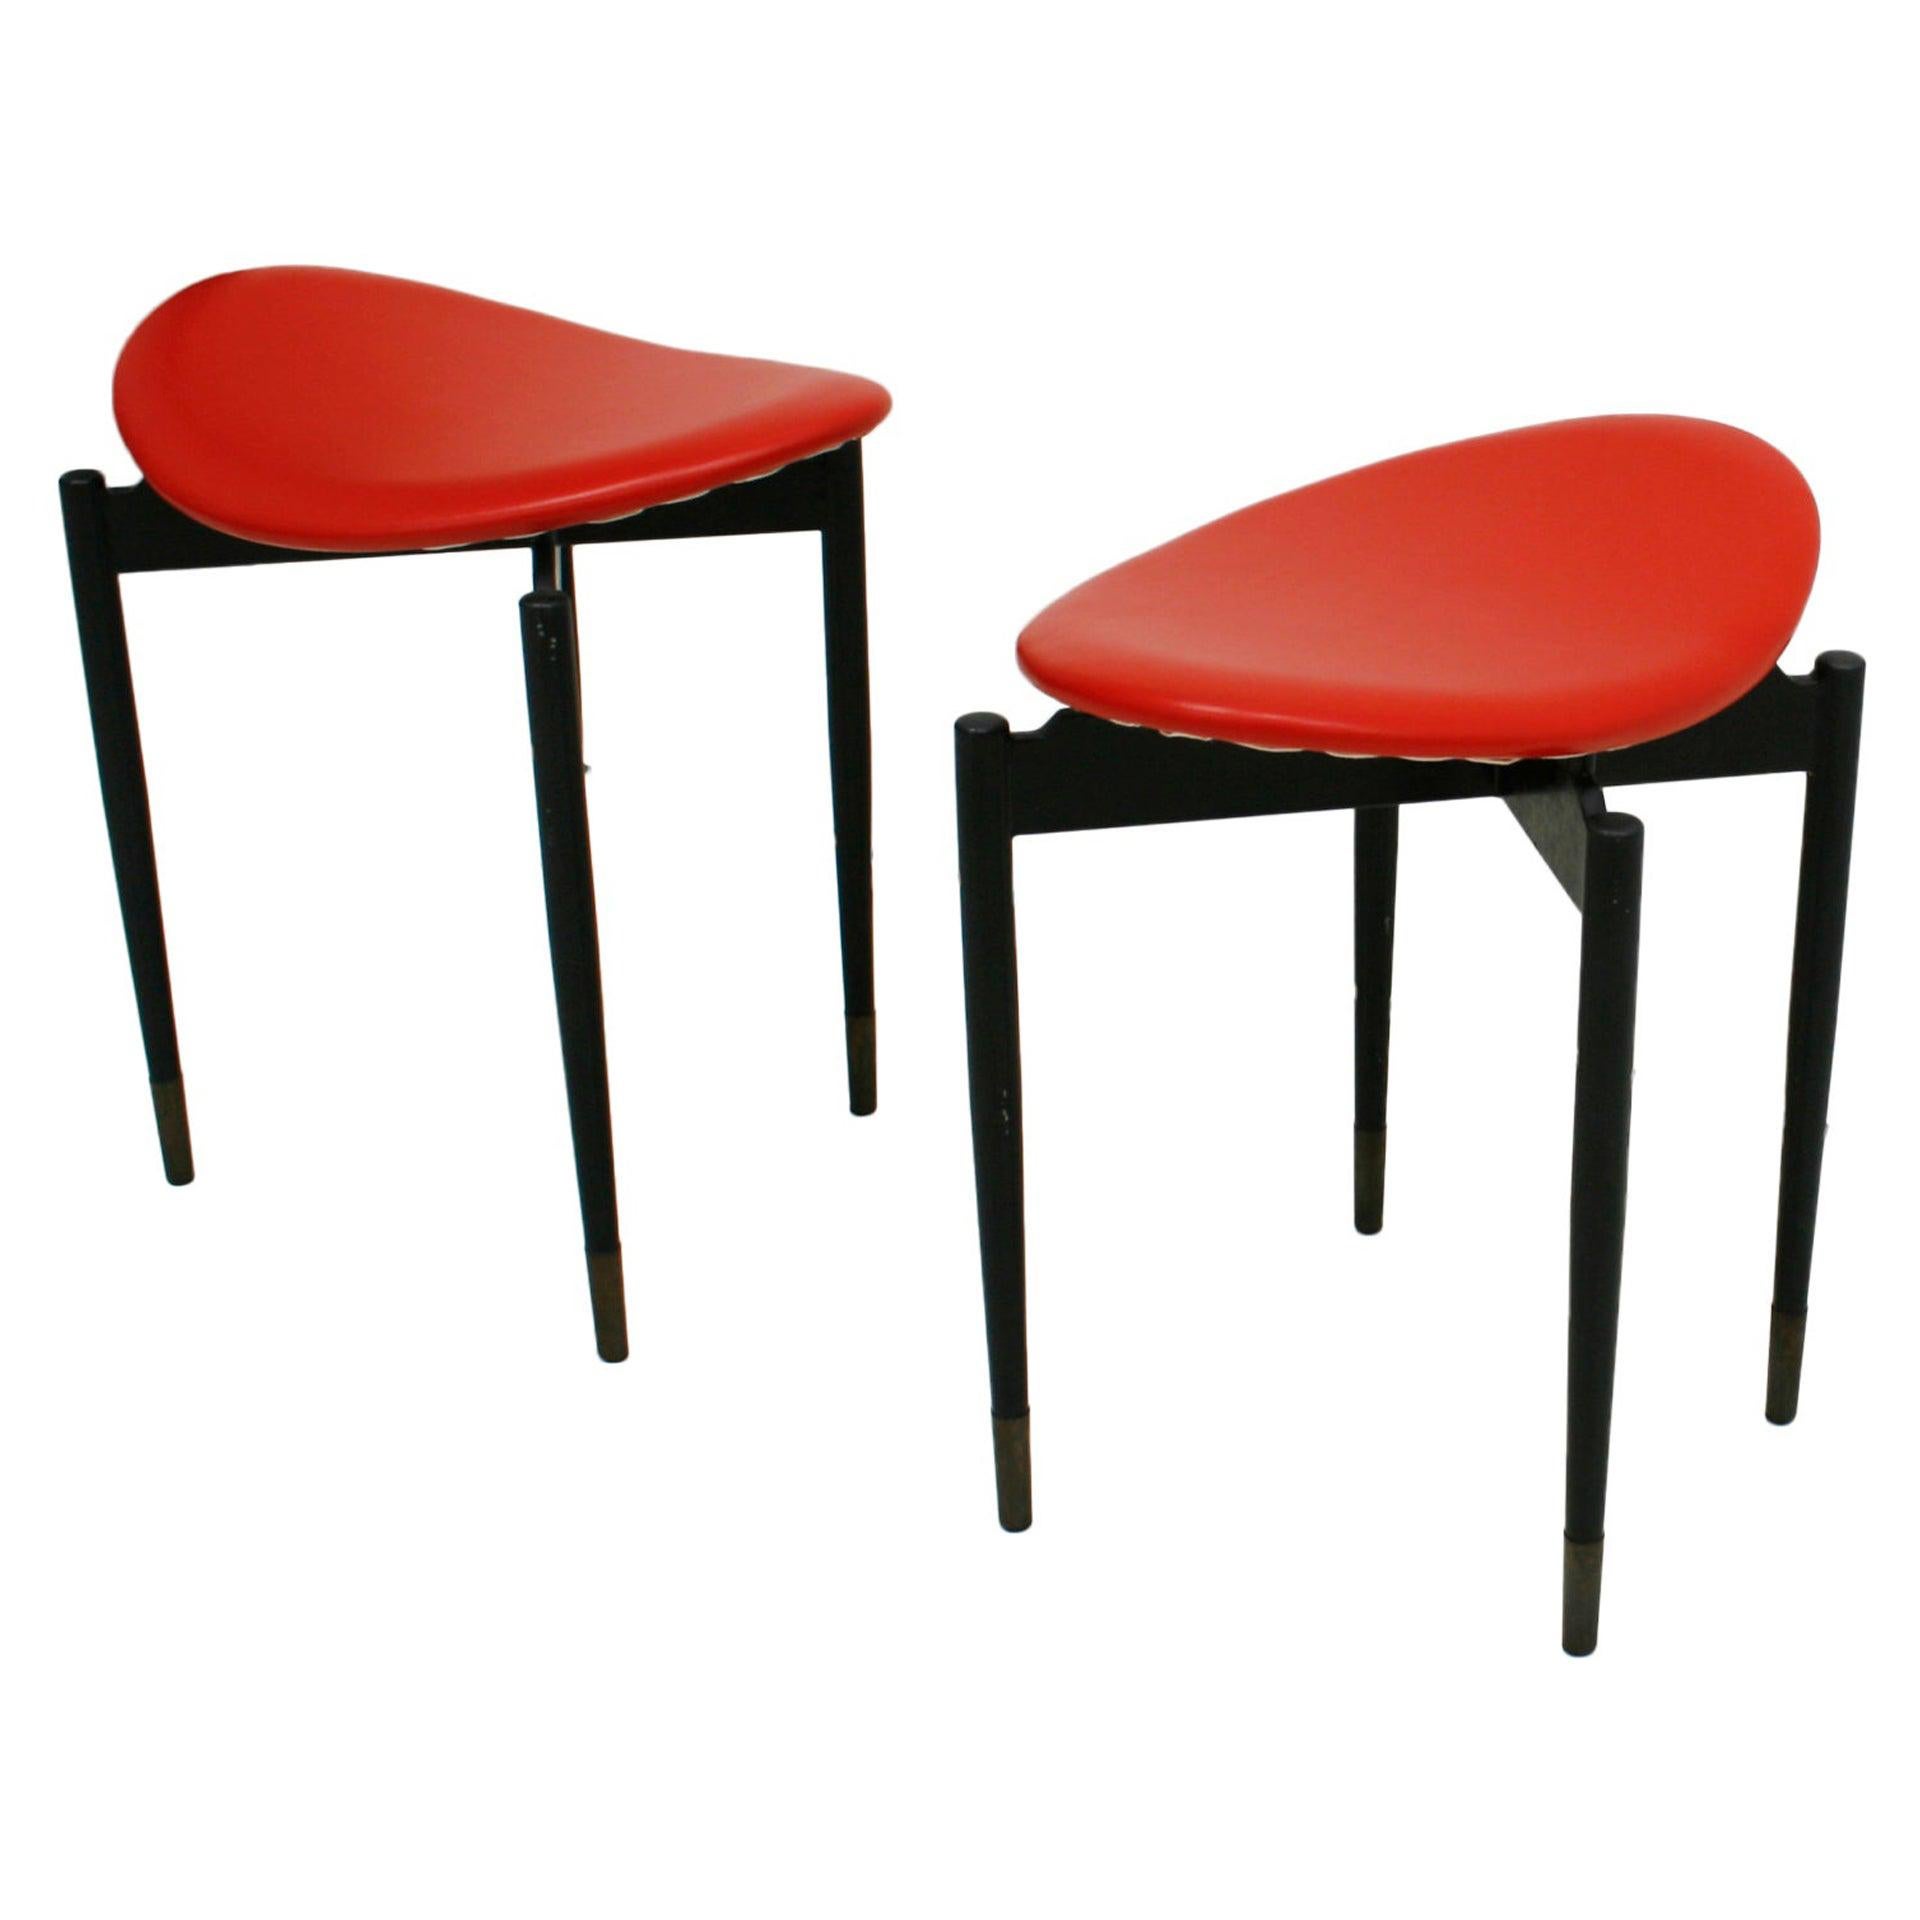 Mid Century Set of Two "Lutrario" Stools Designed by Carlo Mollino, Italy, 1959